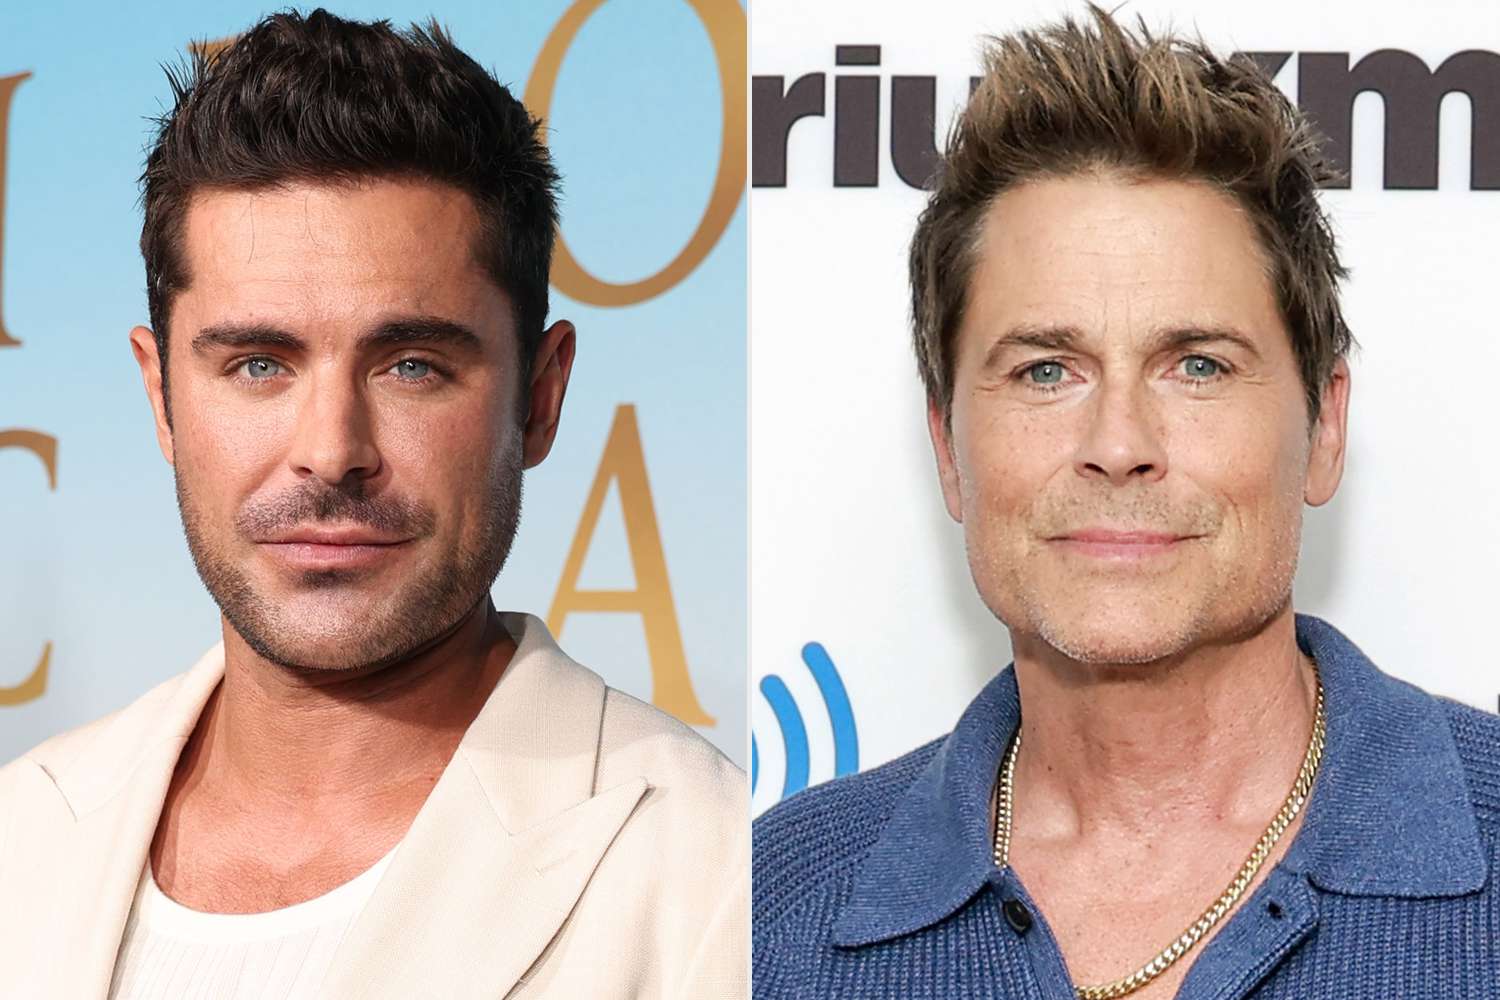 Zac Efron Reacts to Rob Lowe Wanting Efron to Play Him in a Movie: 'I'd Love to — He's the Man' (Exclusive)